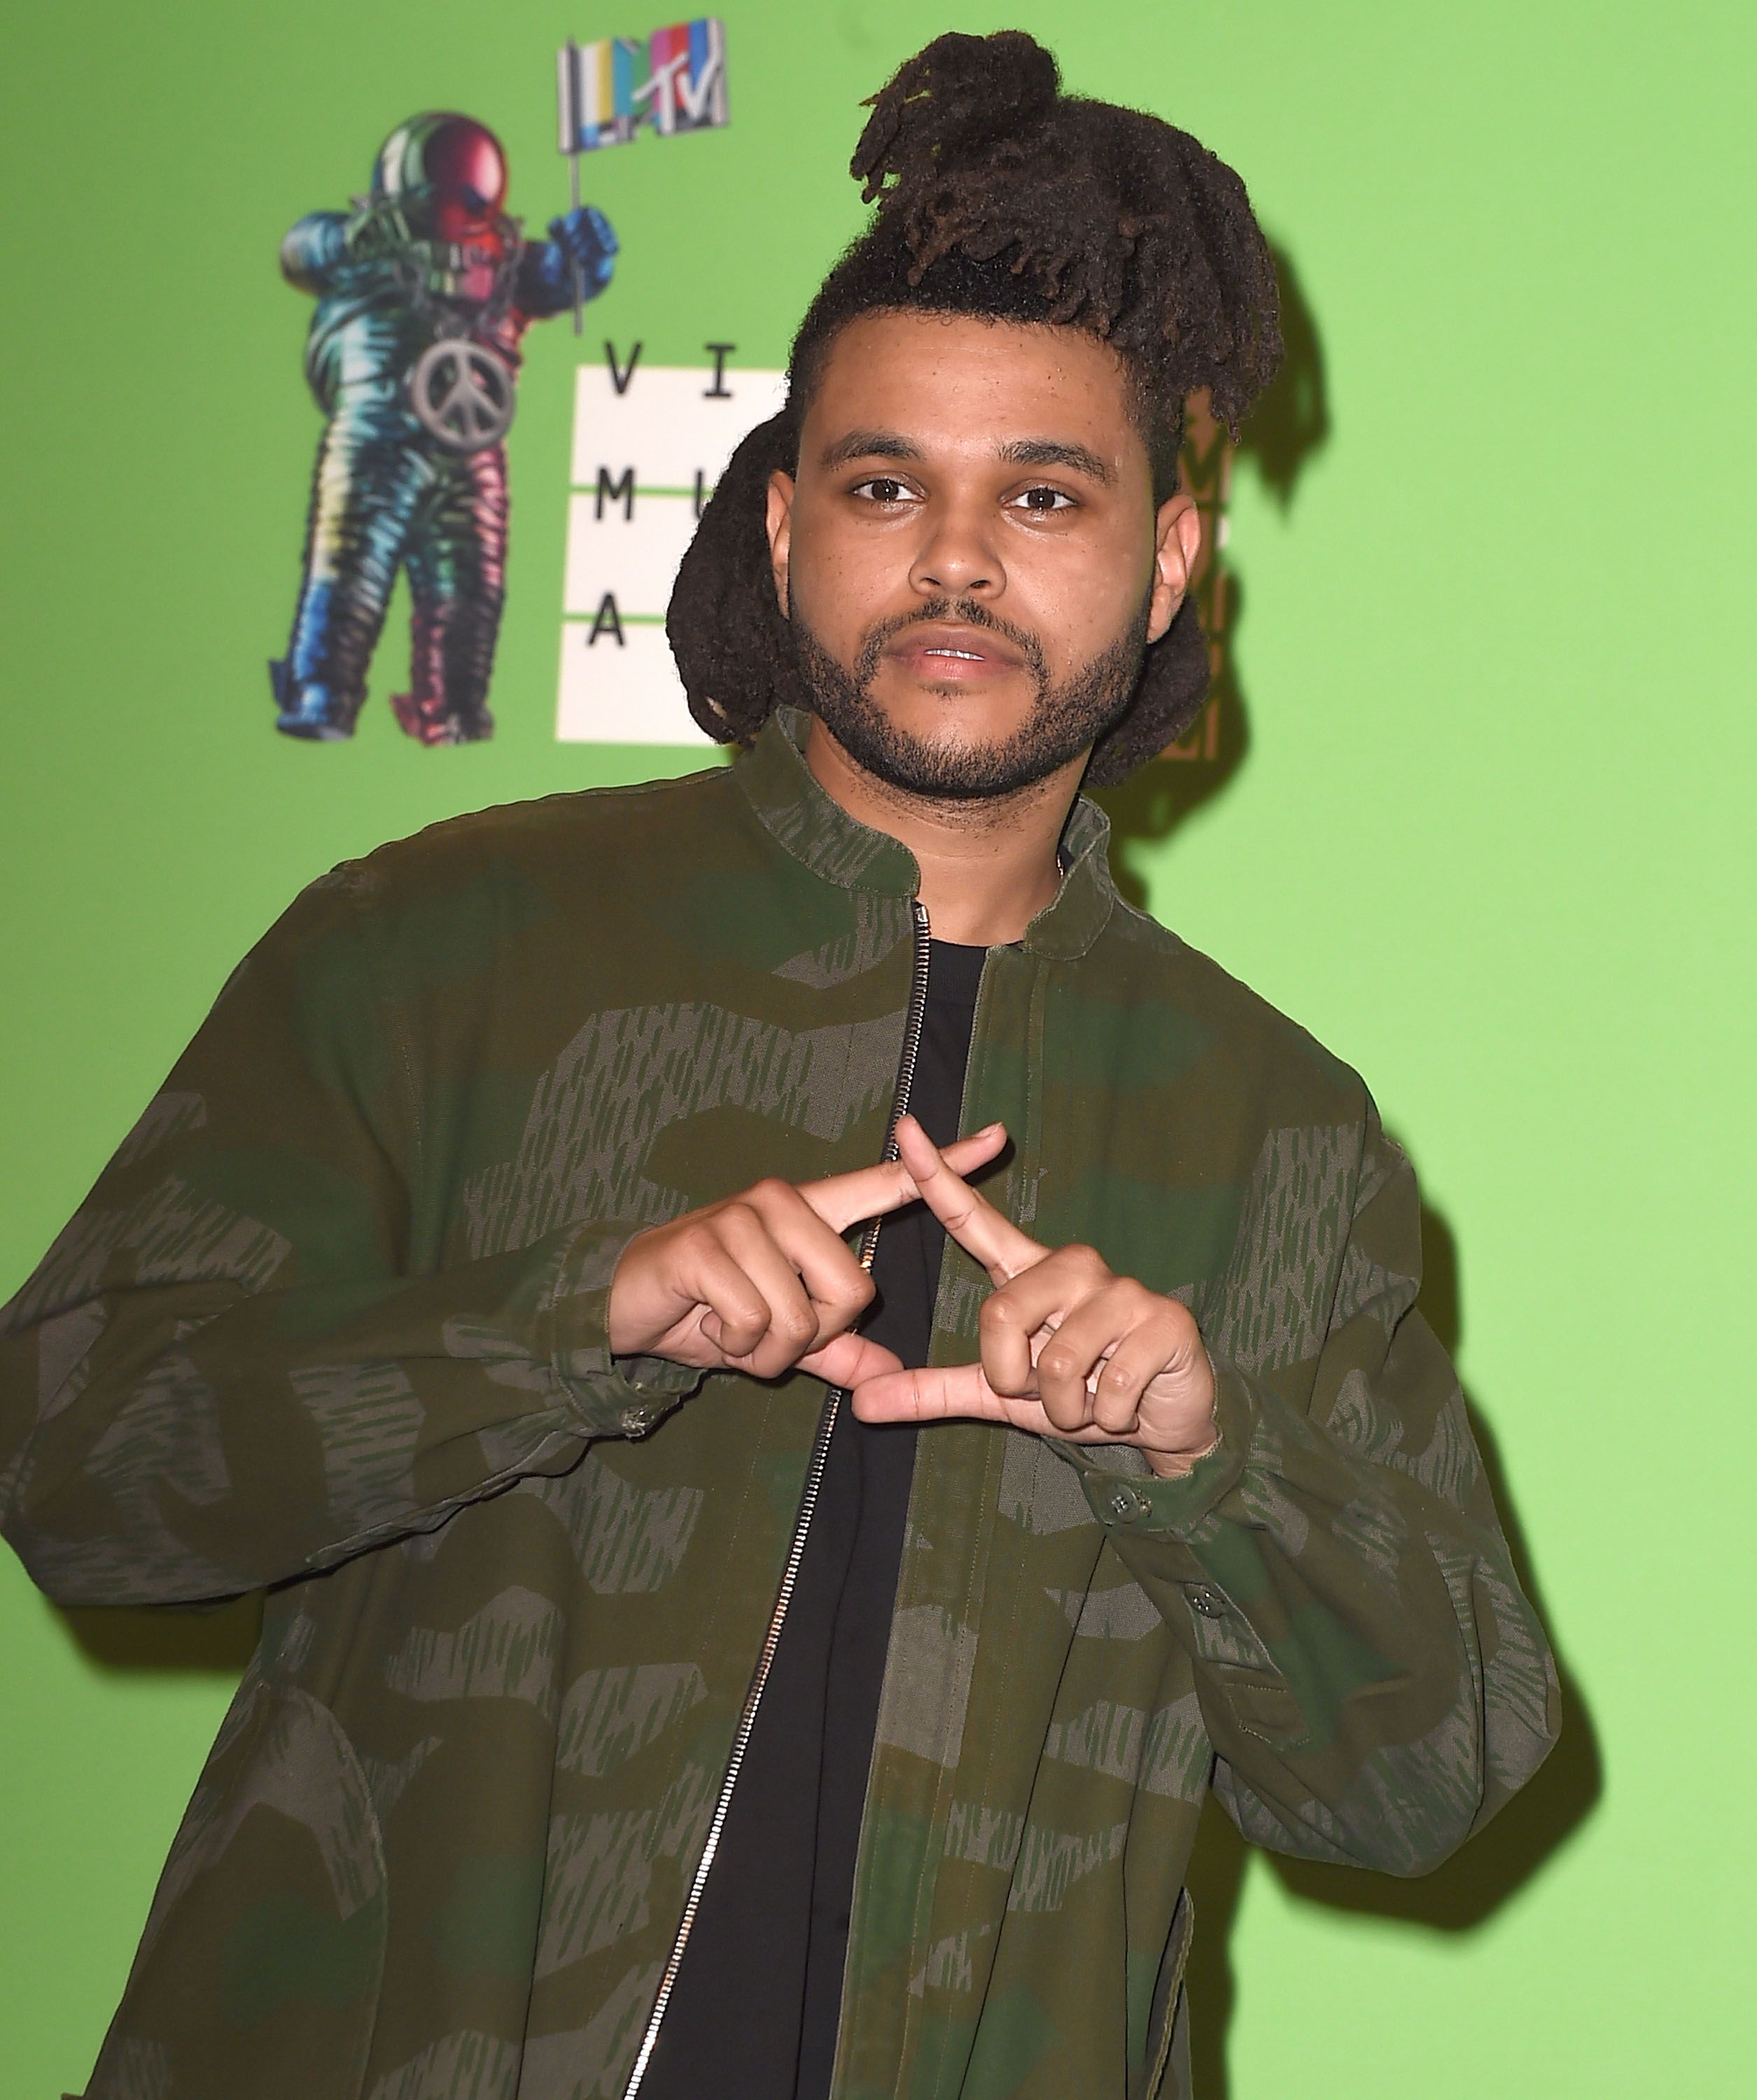 The Weeknd at the MTV Video Music Awards on August 30, 2015, in Los Angeles, California | Photo: Getty Images